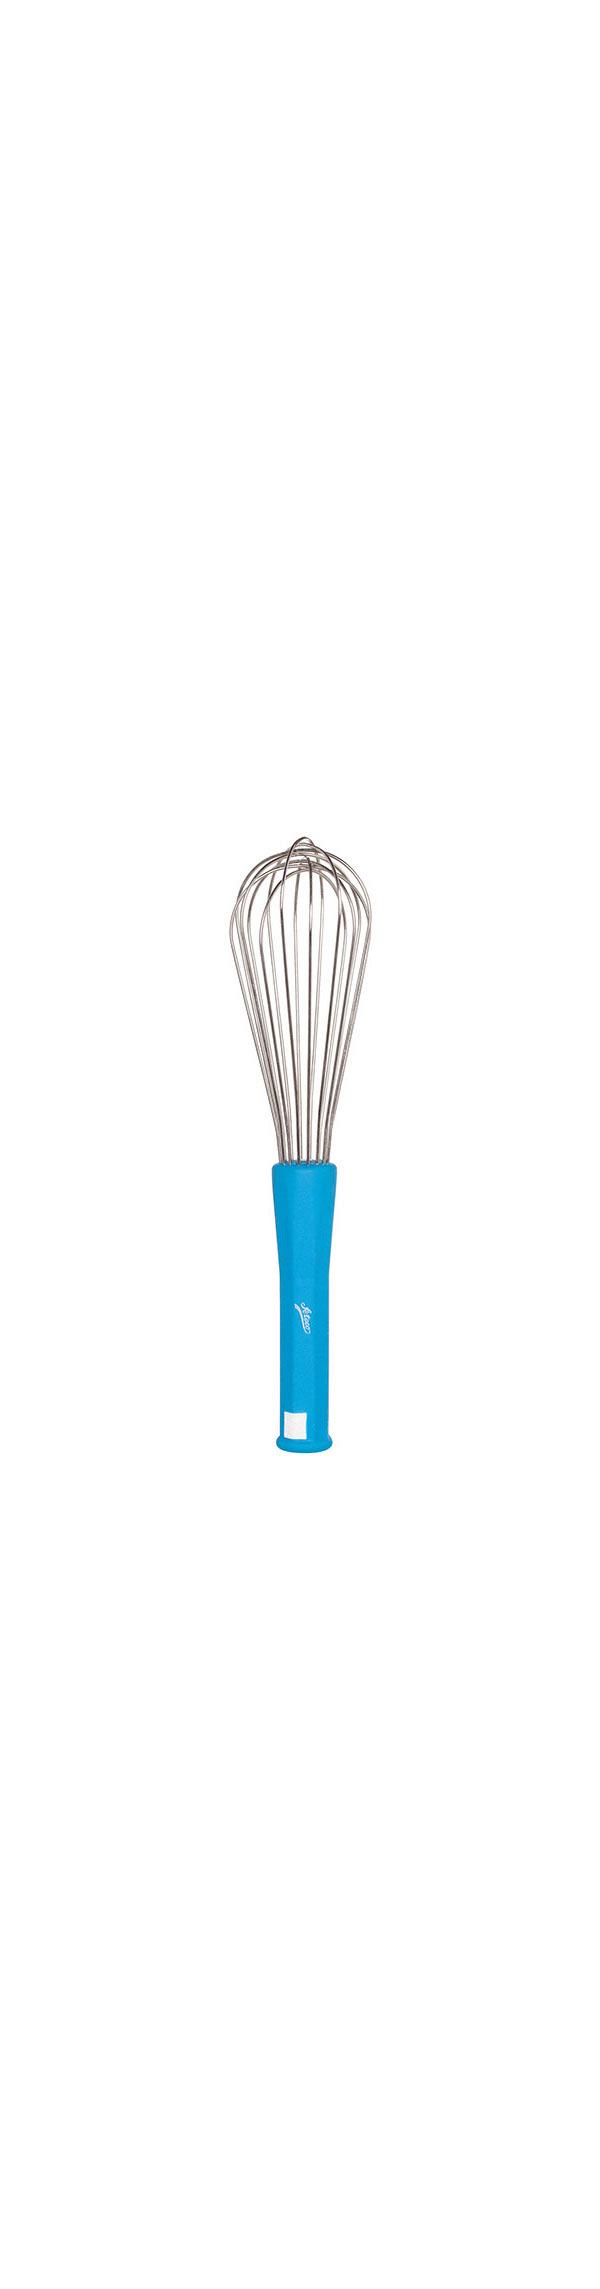 40cm Whisk by Ateco 600